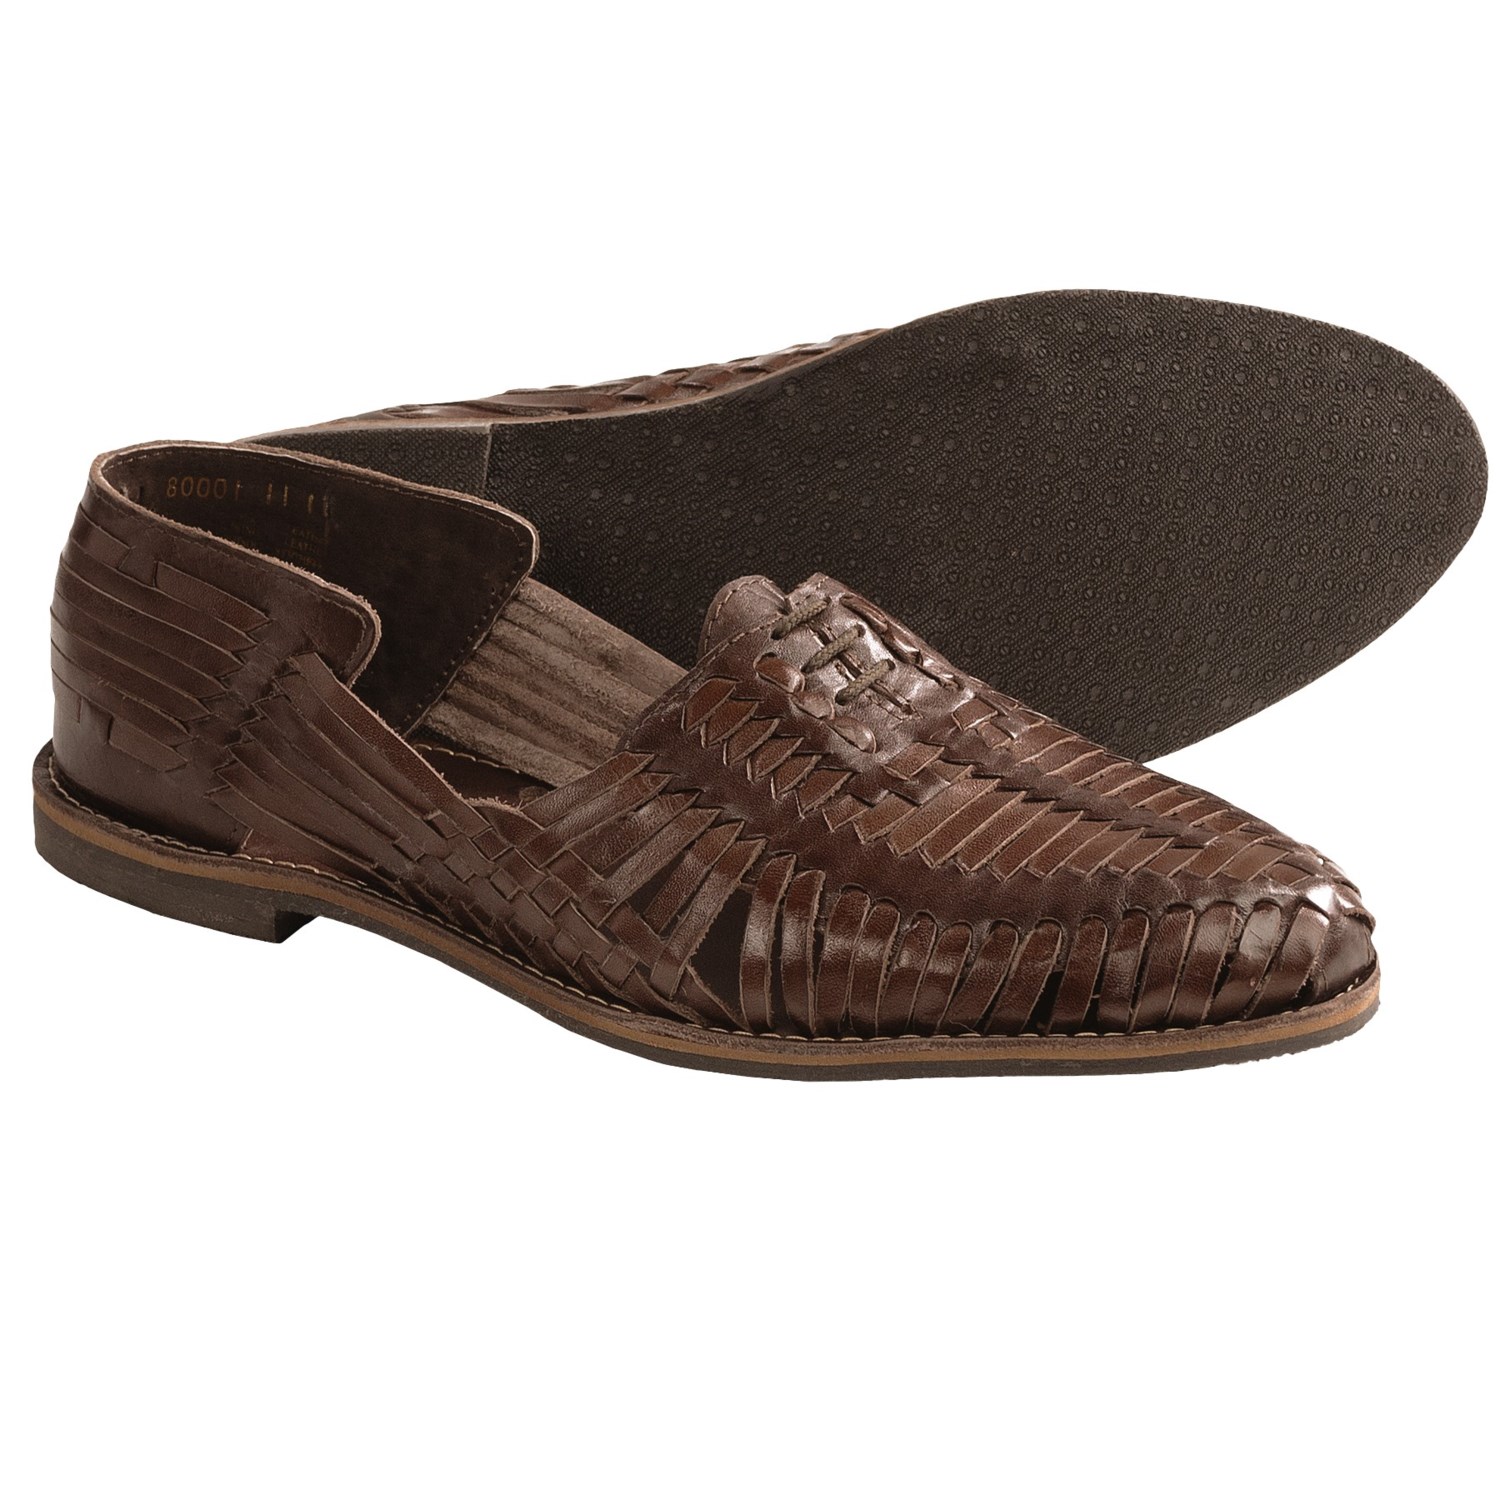 Fisk Hugo Loafer Shoes - Woven Leather (For Men) in Brown Leather